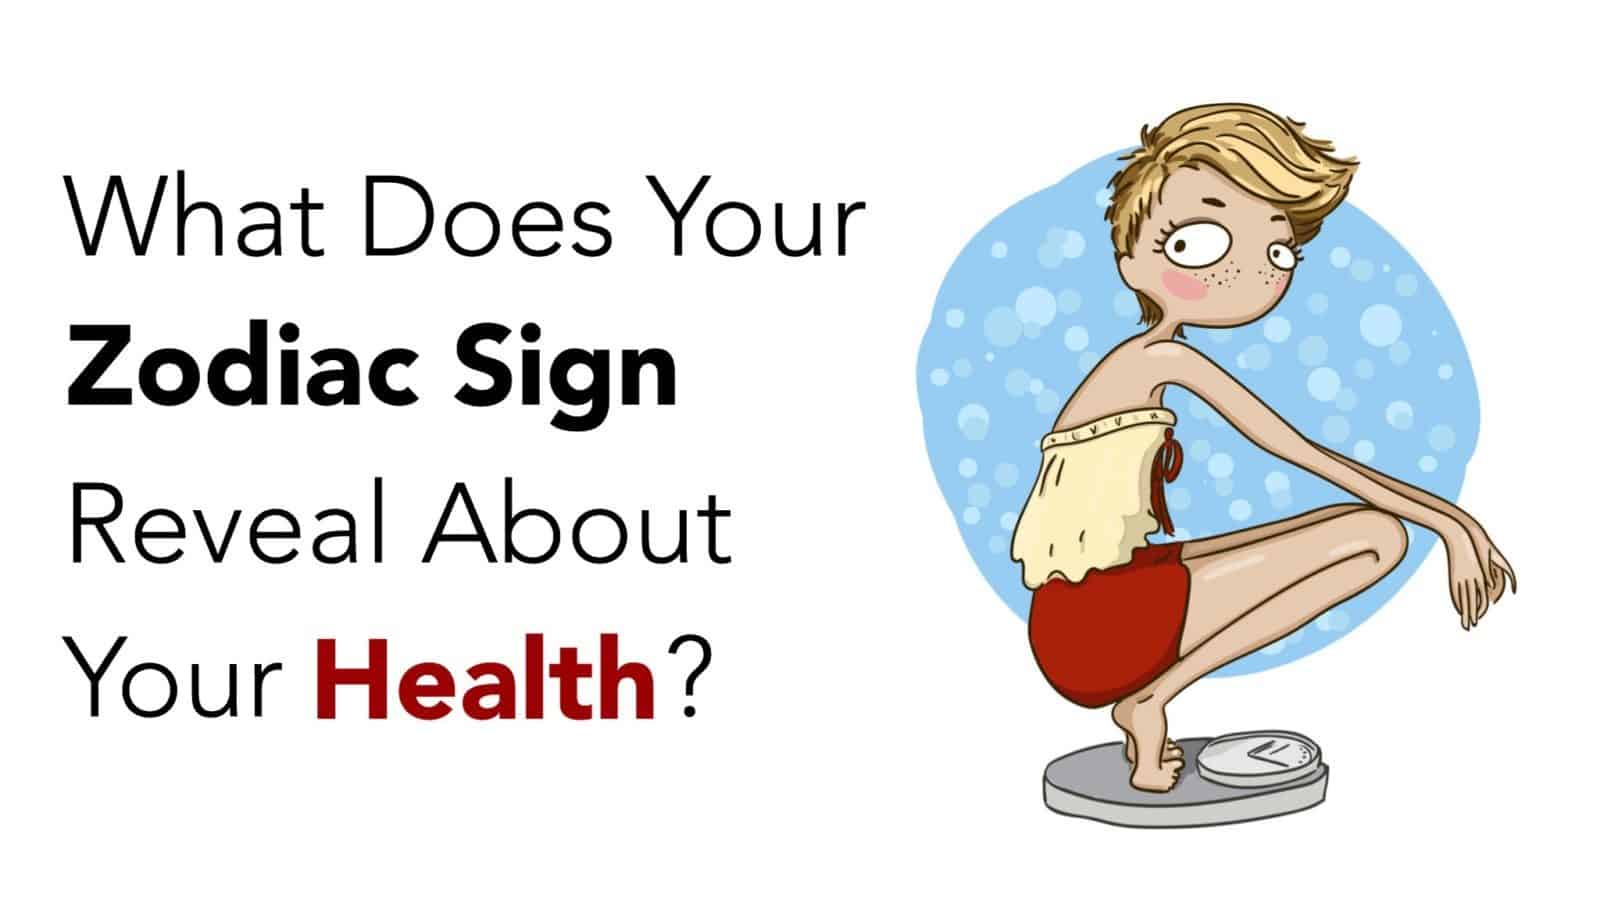 Medical conditions in light of zodiac signs